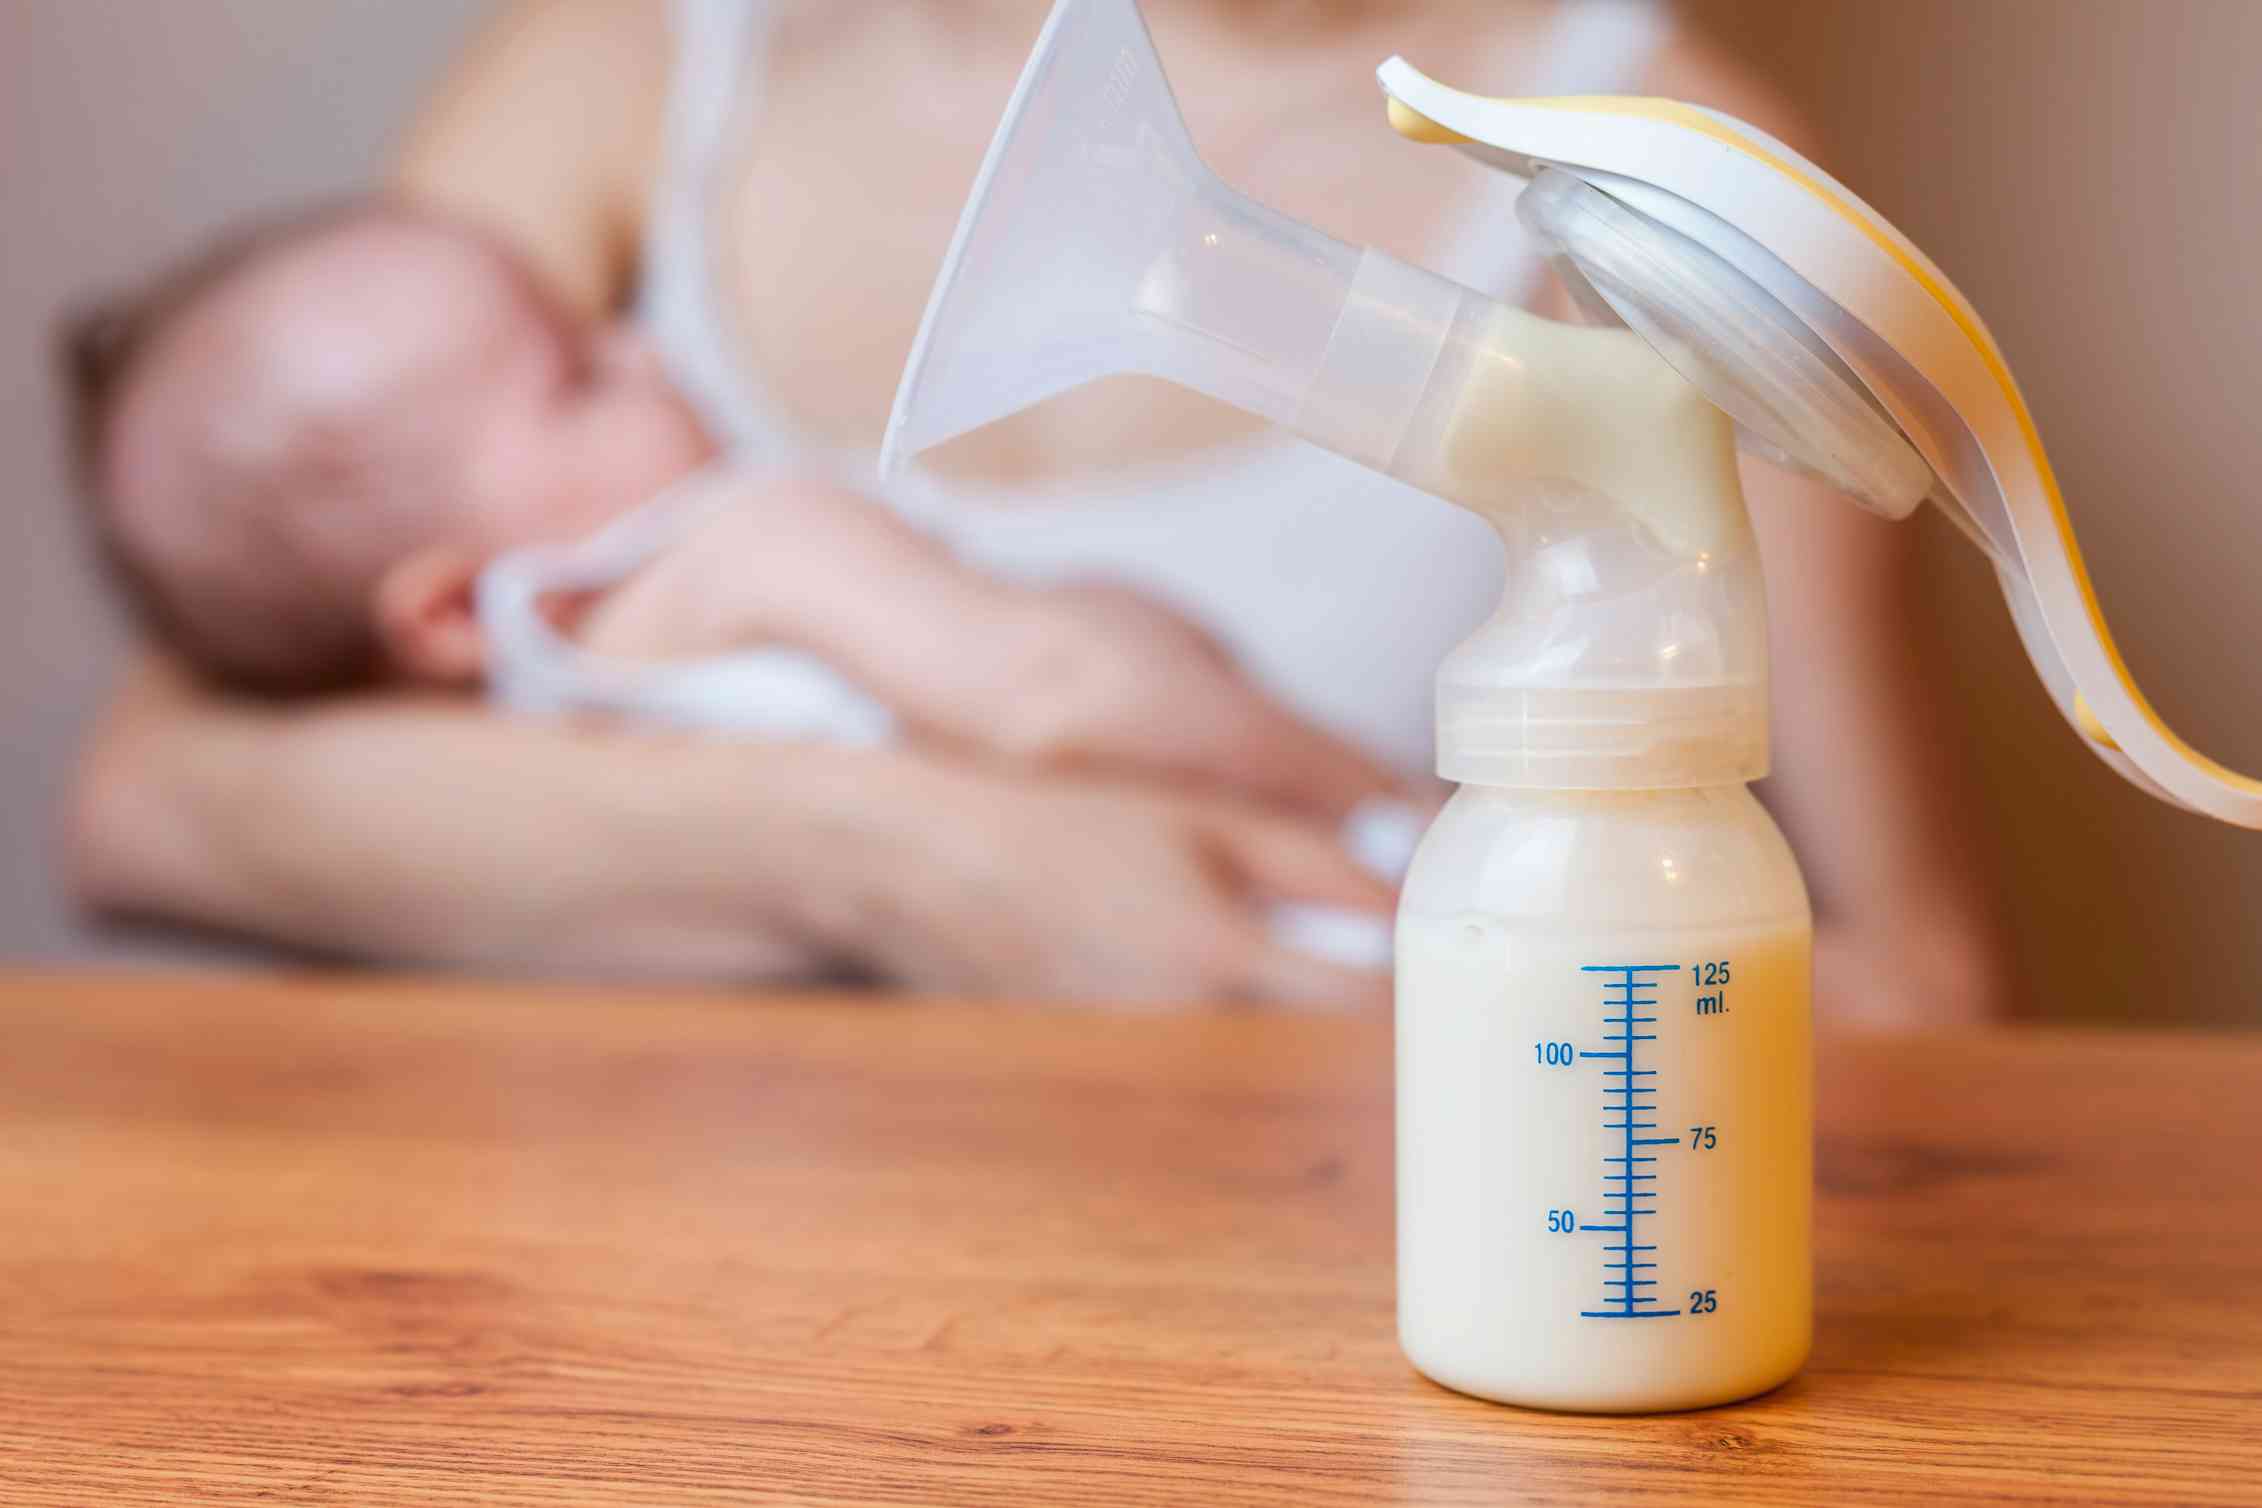 Is It Safe To Drink Alcohol While Breastfeeding